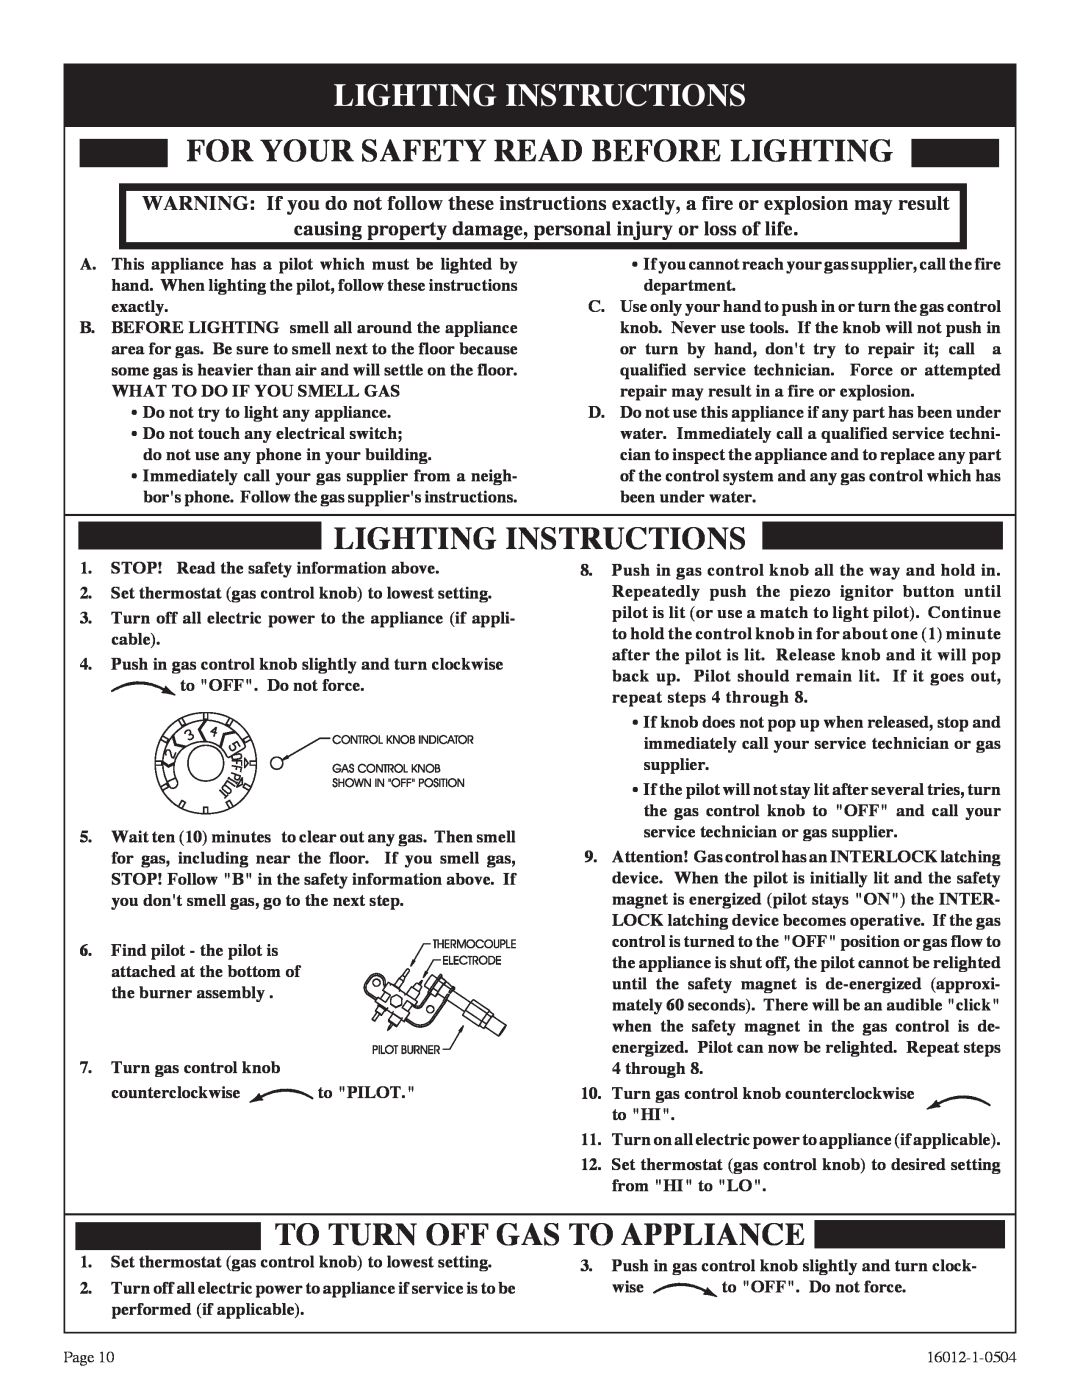 Empire Products BF-30-2, BF-20-2 Lighting Instructions, For Your Safety Read Before Lighting, To Turn Off Gas To Appliance 